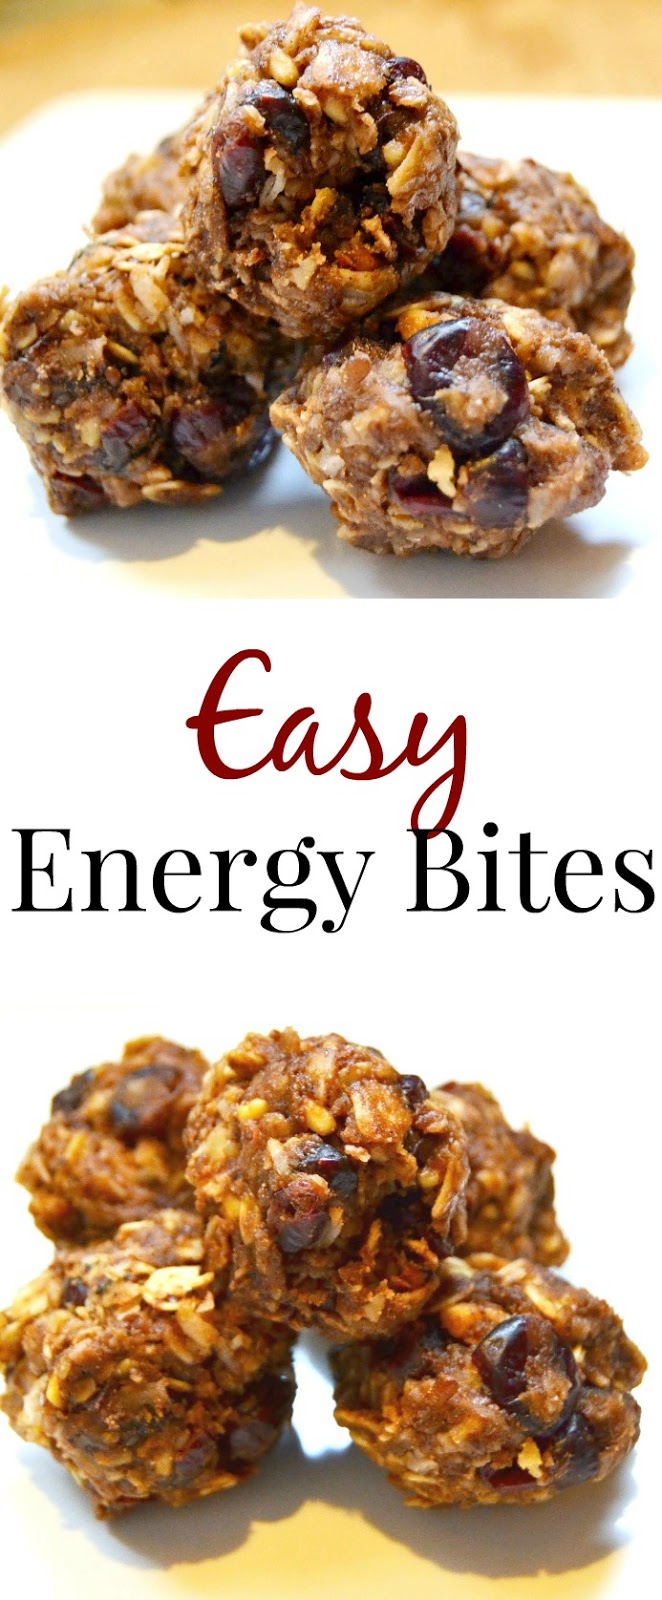 These simple Energy Bites come together in no time and are an easy, filling and tasty snack! www.nutritionistreviews.com